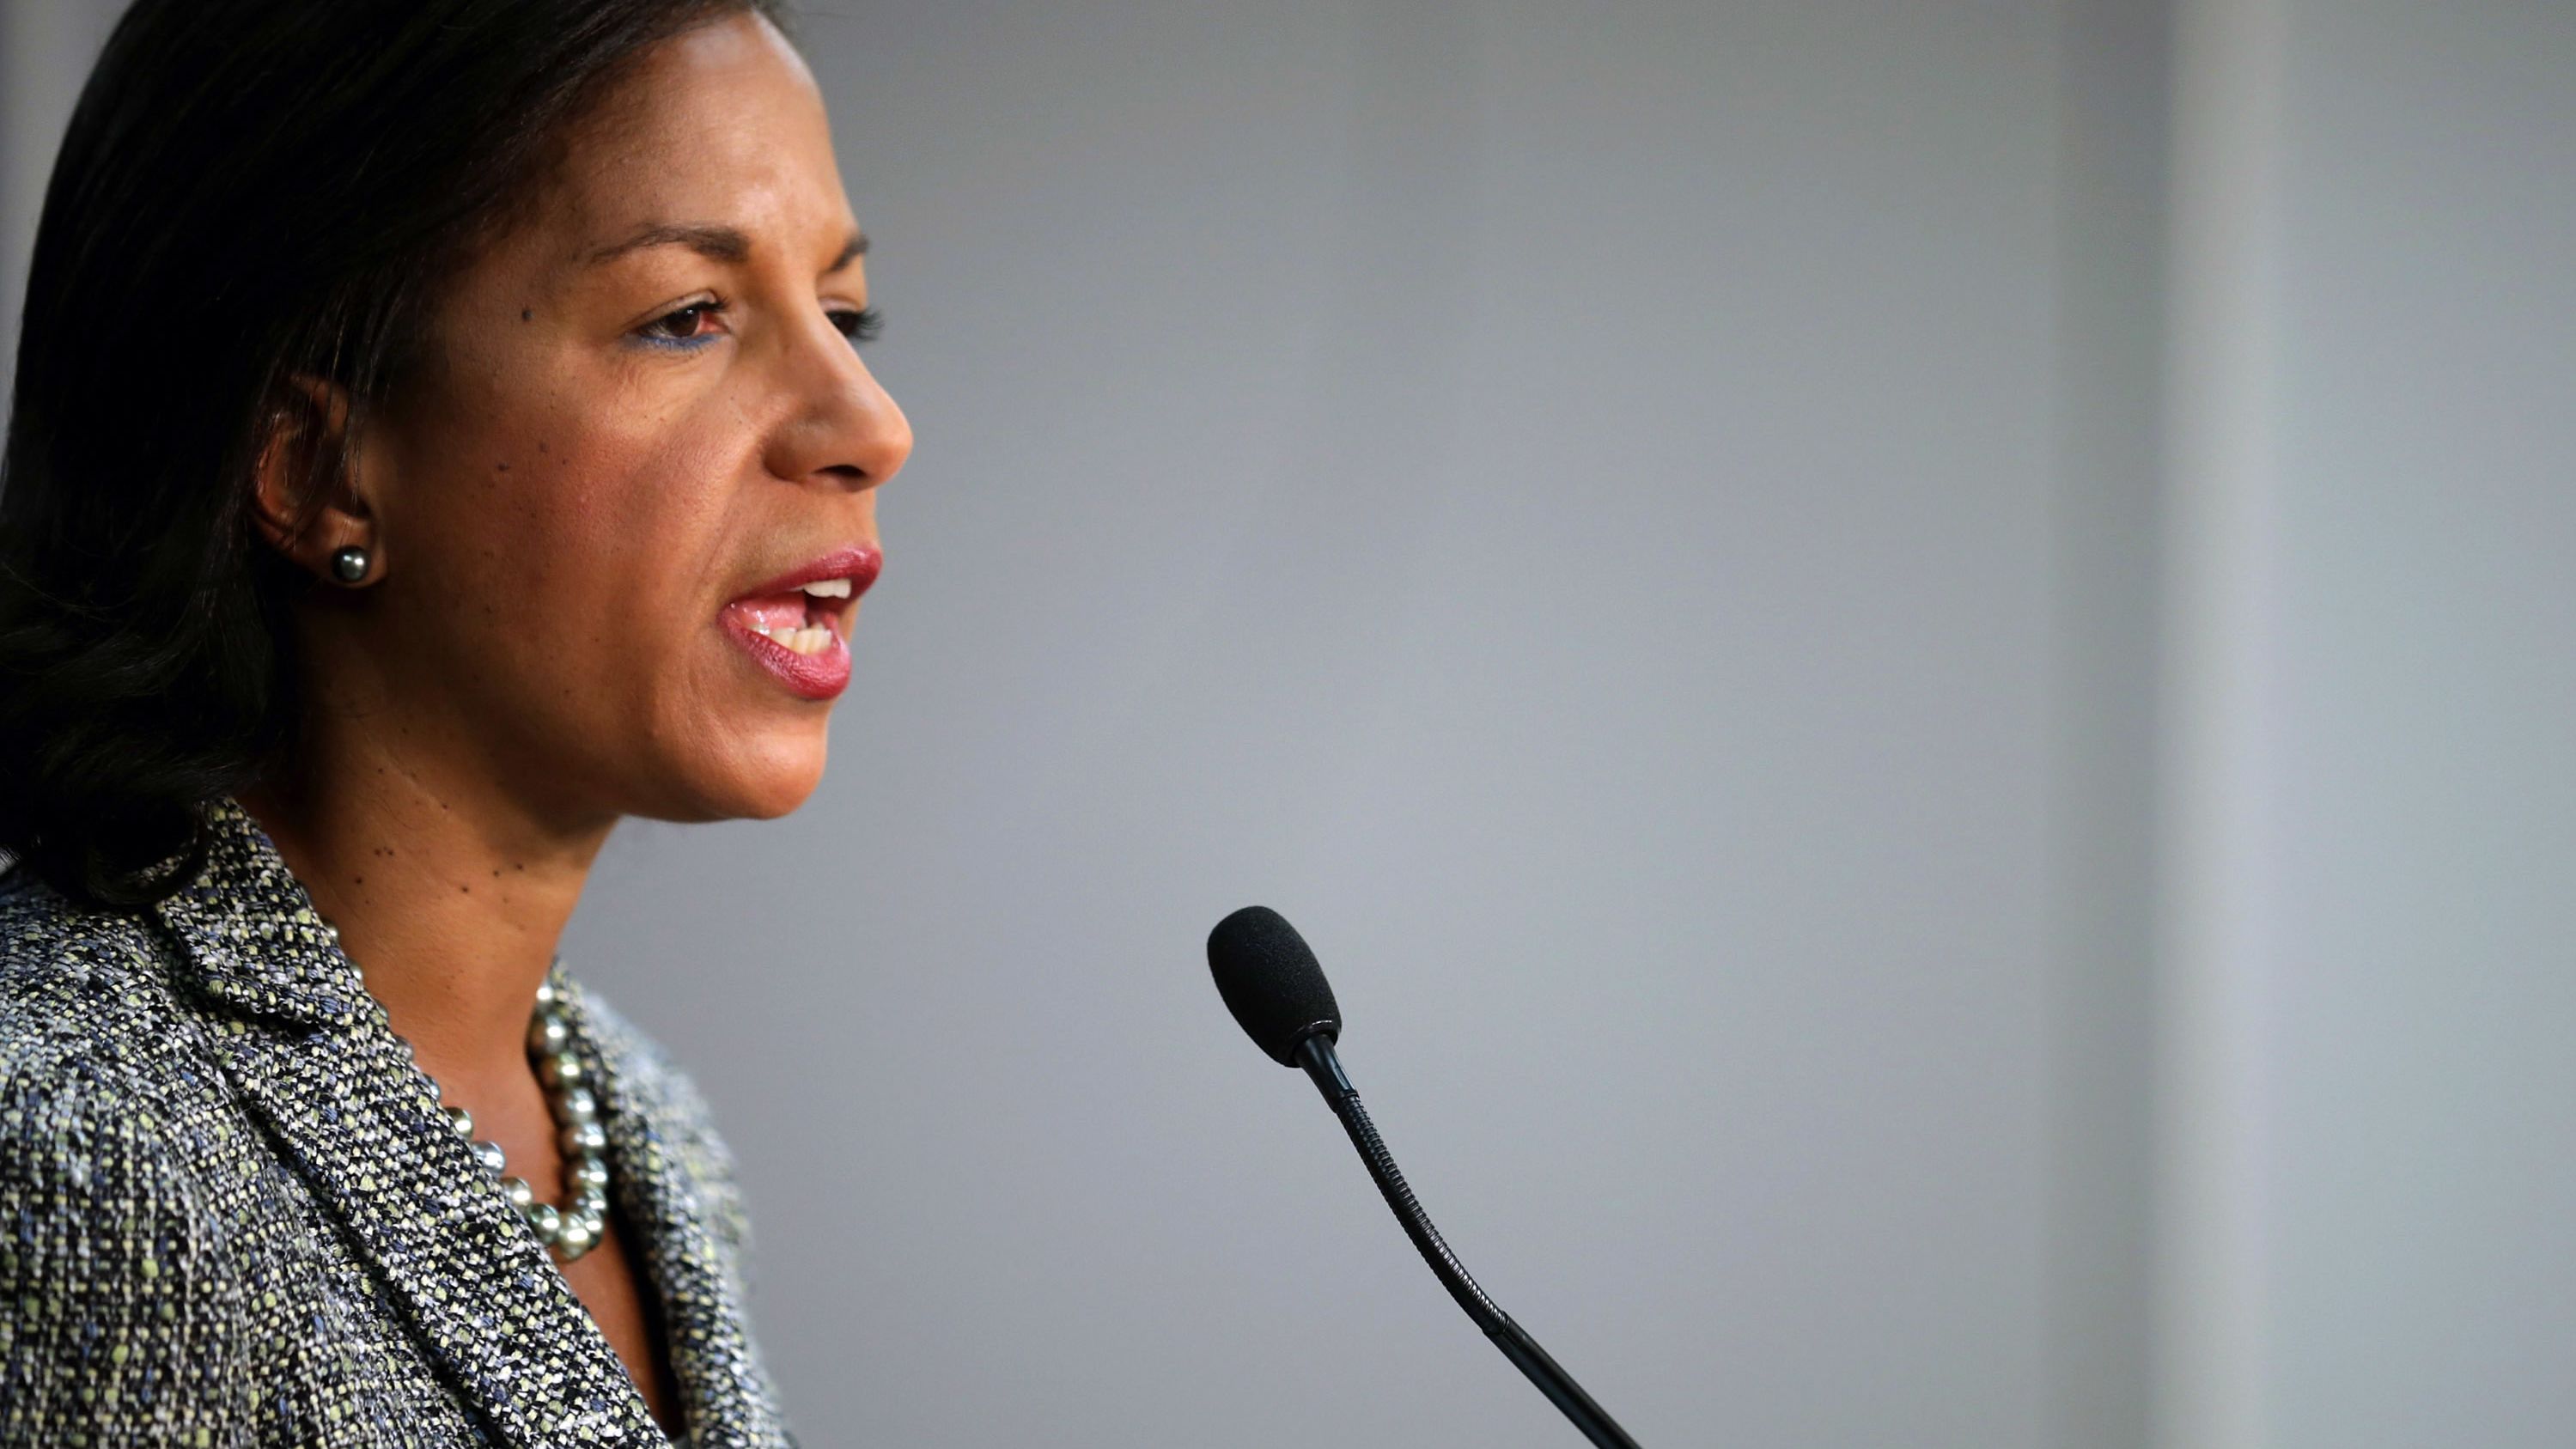 U.S. National Security Adviser Susan Rice warned it "would be a grave mistake" if Russian President Vladimir Putin intervened militarily in the ongoing crisis in Ukraine. 